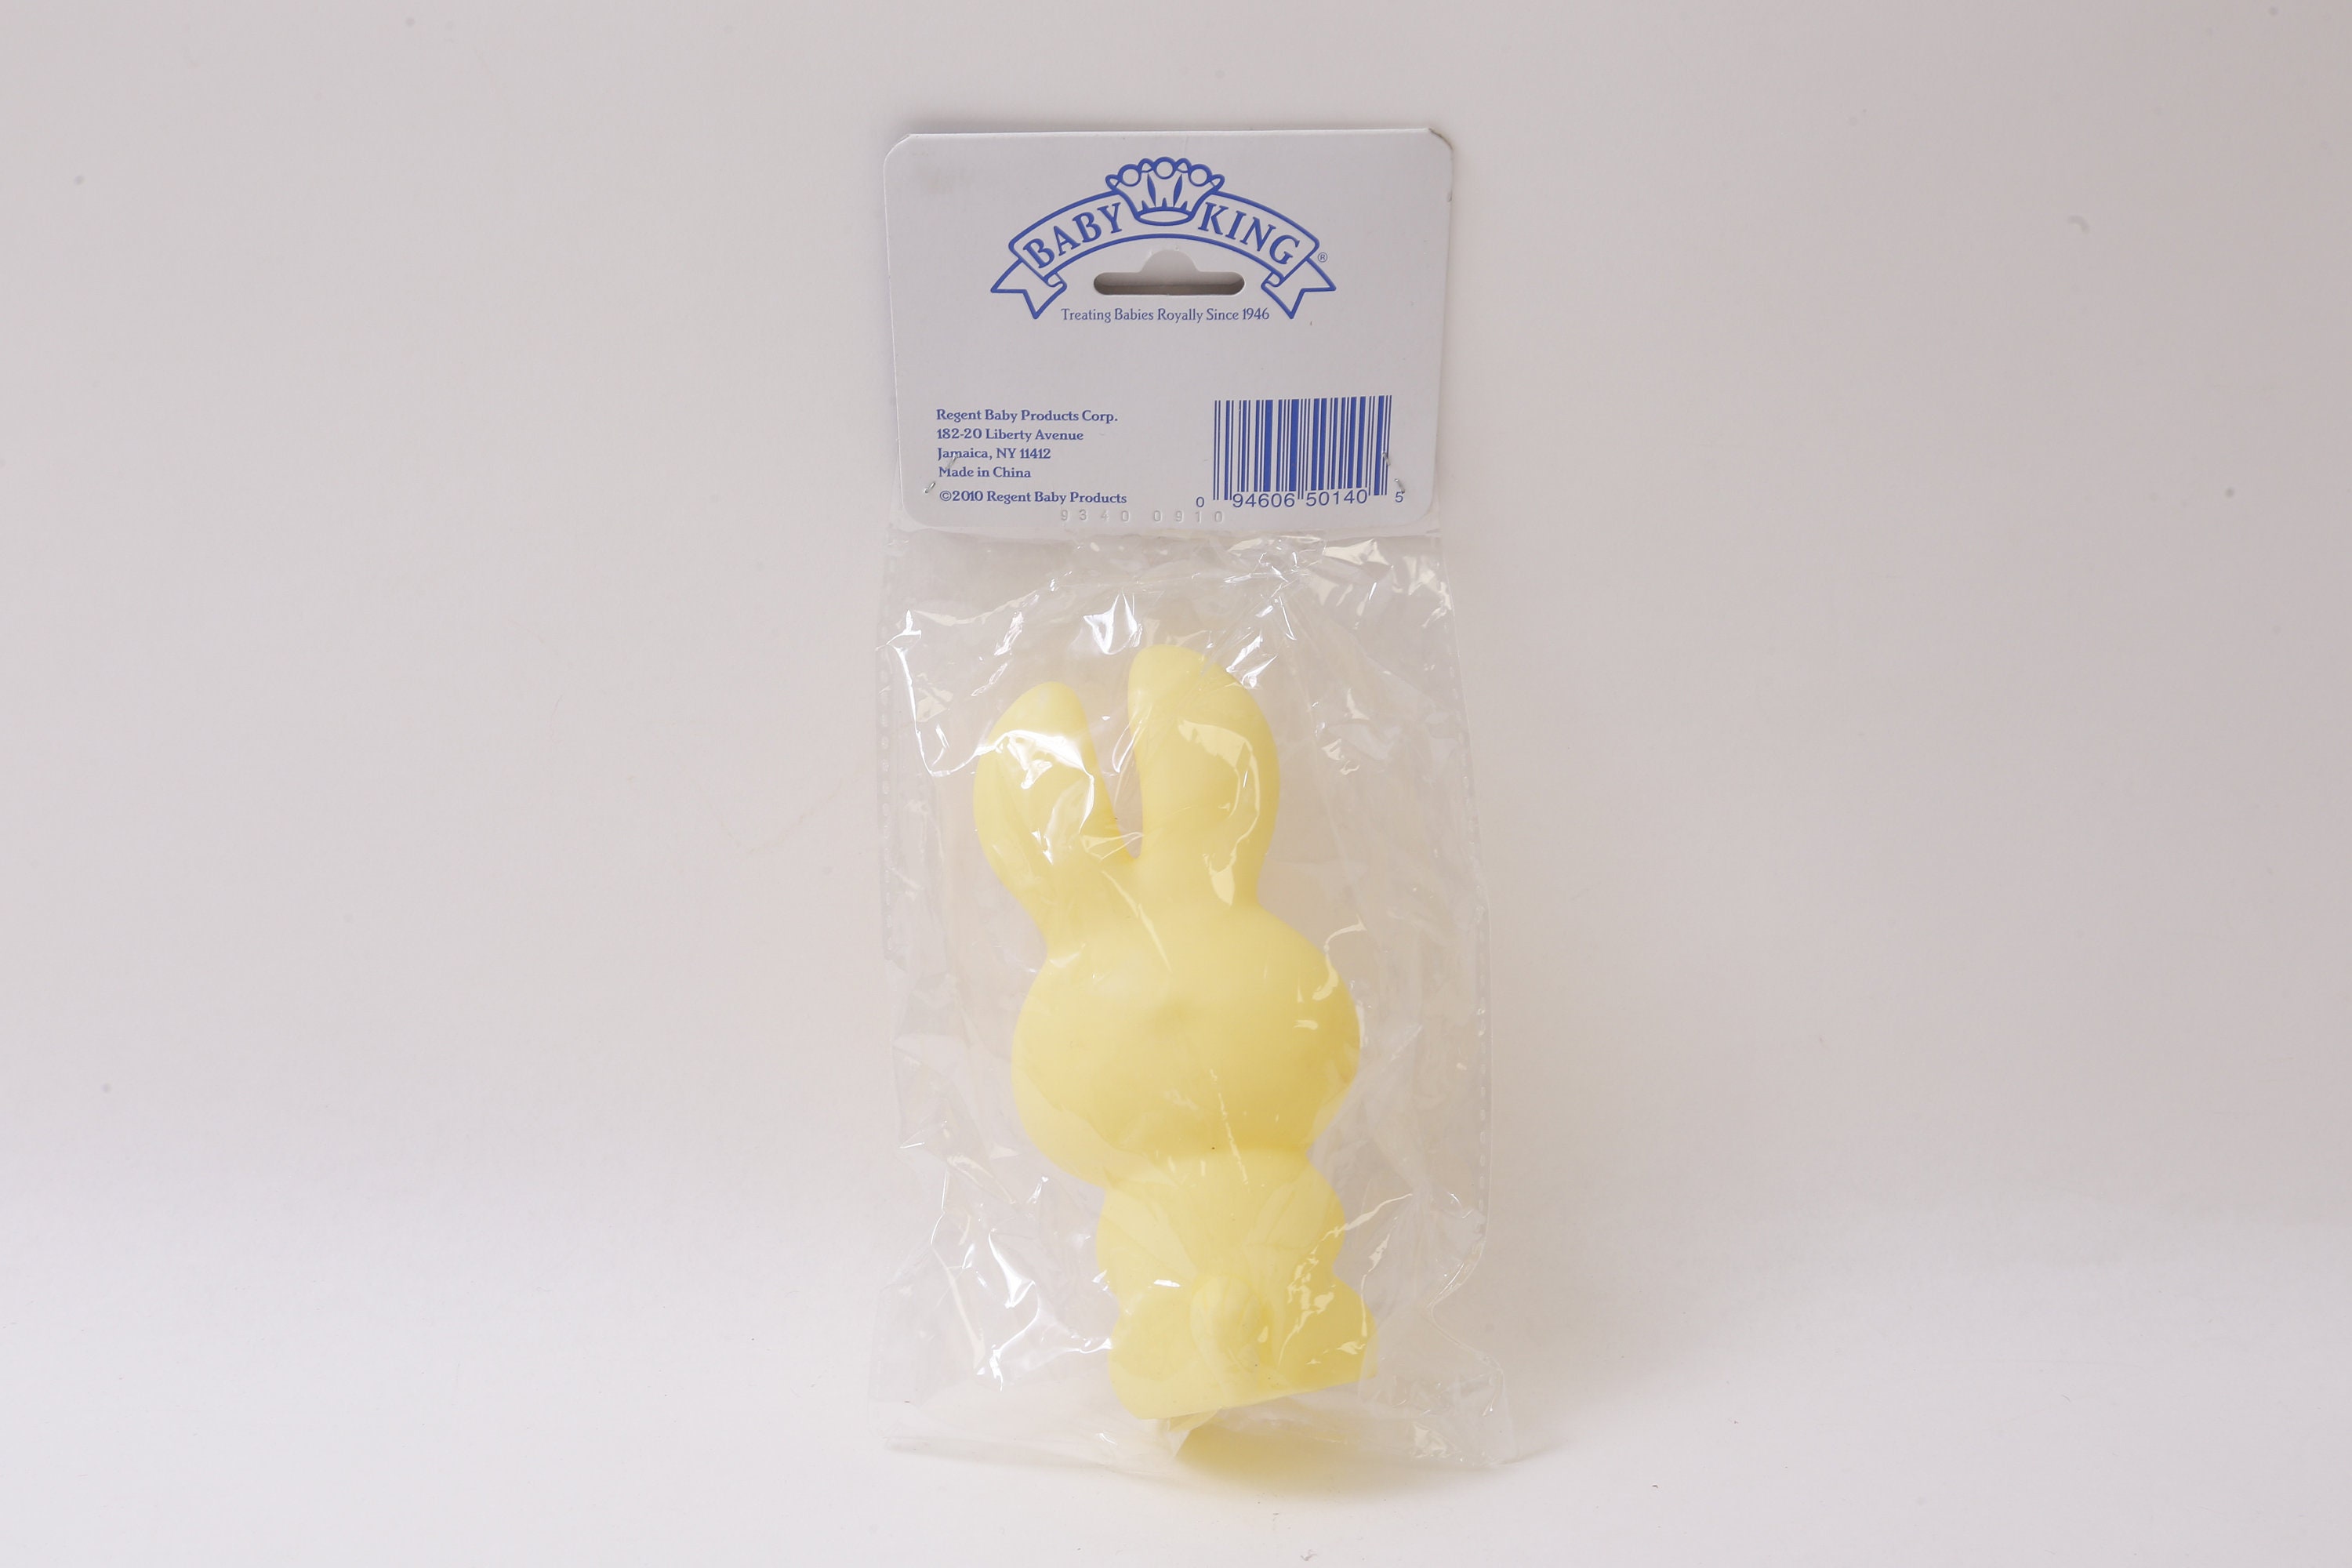 Baby King, Squeaky Toy, Dog Toy, Yellow Bunny, Squeeze Toy, Figure